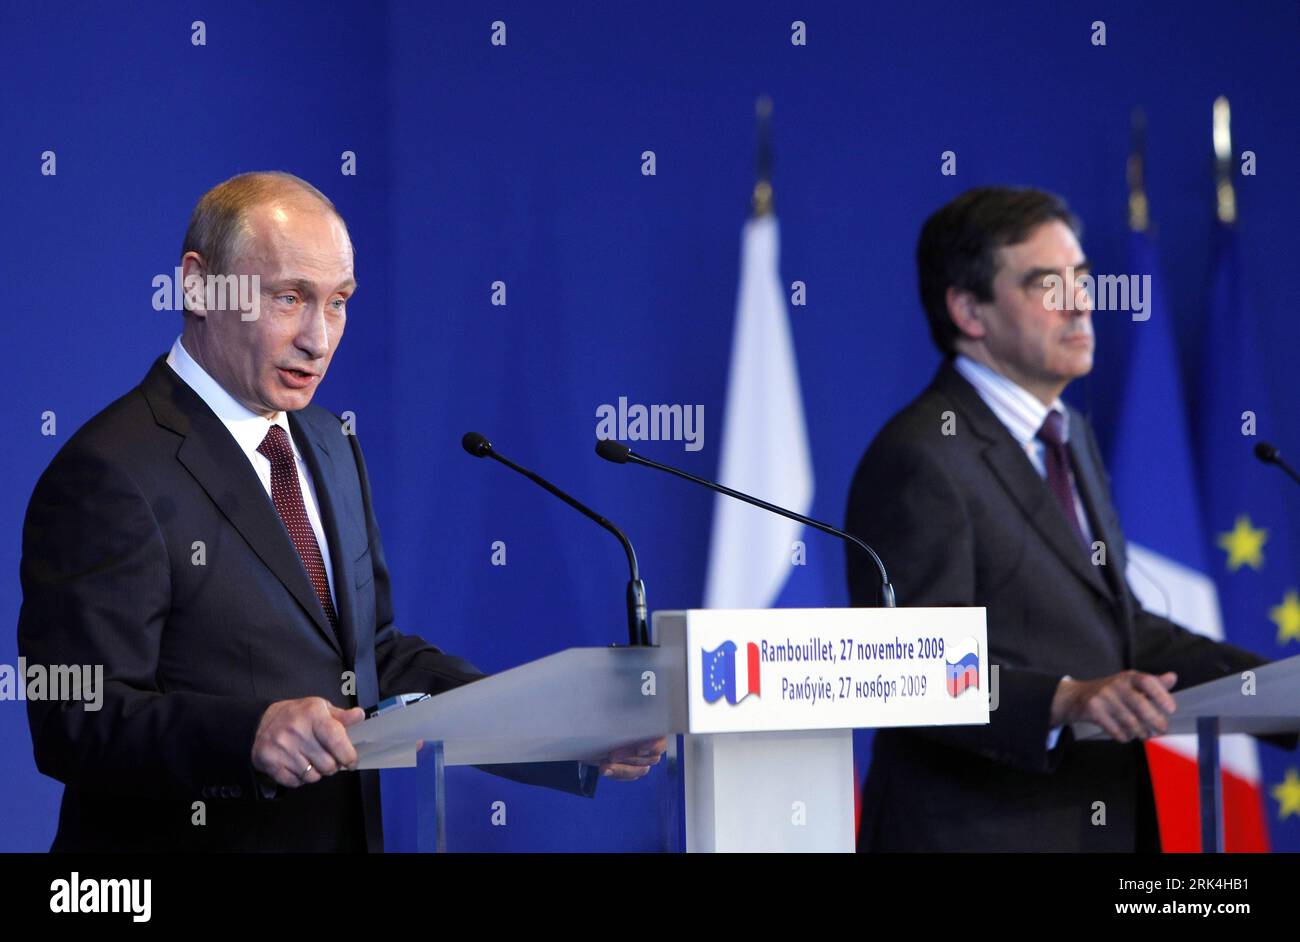 Bildnummer: 53632056  Datum: 27.11.2009  Copyright: imago/Xinhua (091128) -- PARIS, Nov. 28, 2009 (Xinhua) -- Russian Prime Minister Vladimir Putin (L) and France s Prime Minister Francois Fillon attend a press conference in Rambouillet castle, France, Nov. 27, 2009. Francois Fillon and Vladimir Putin presented the 14th session of France- Russia intergovernment seminar in Rambouillet Chateau in southwest suburb of Paris. (Xinhua/Zhang Yuwei) (6)FRNACE-PARIS-RUSSIA-SEMINAR PUBLICATIONxNOTxINxCHN Rambouillet People Politik Wirtschaft Russland Frankreich PK Pressetermin Treffen kbdig xub 2009 que Stock Photo